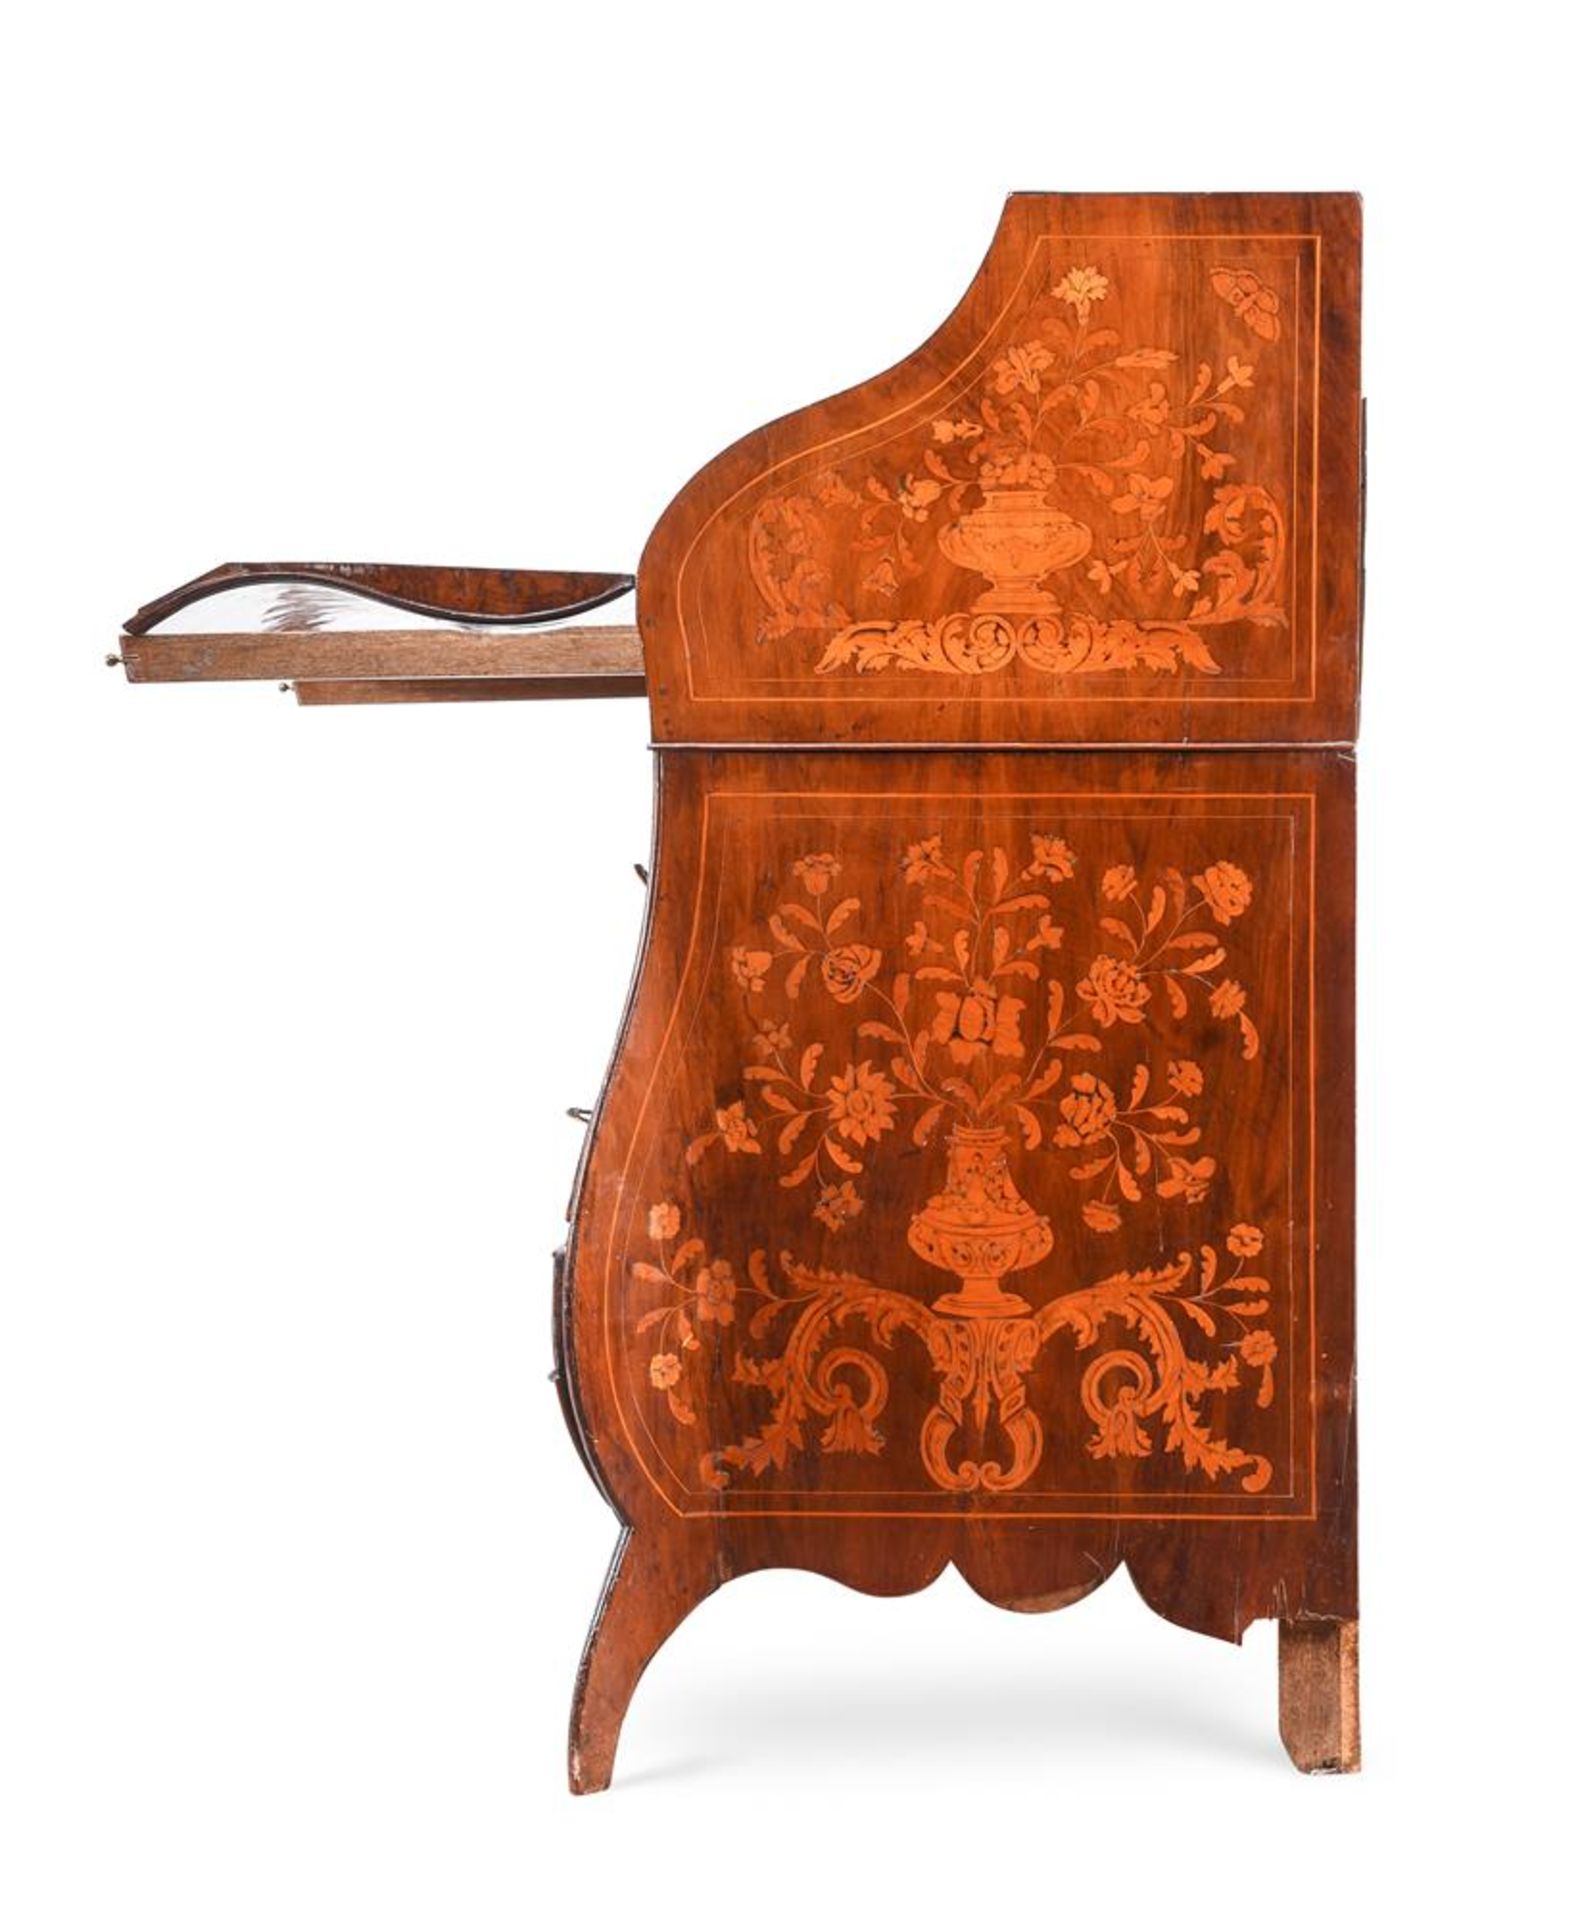 A DUTCH WALNUT AND FLORAL MARQUETRY BUREAU, LATE 18TH CENTURY - Image 4 of 6